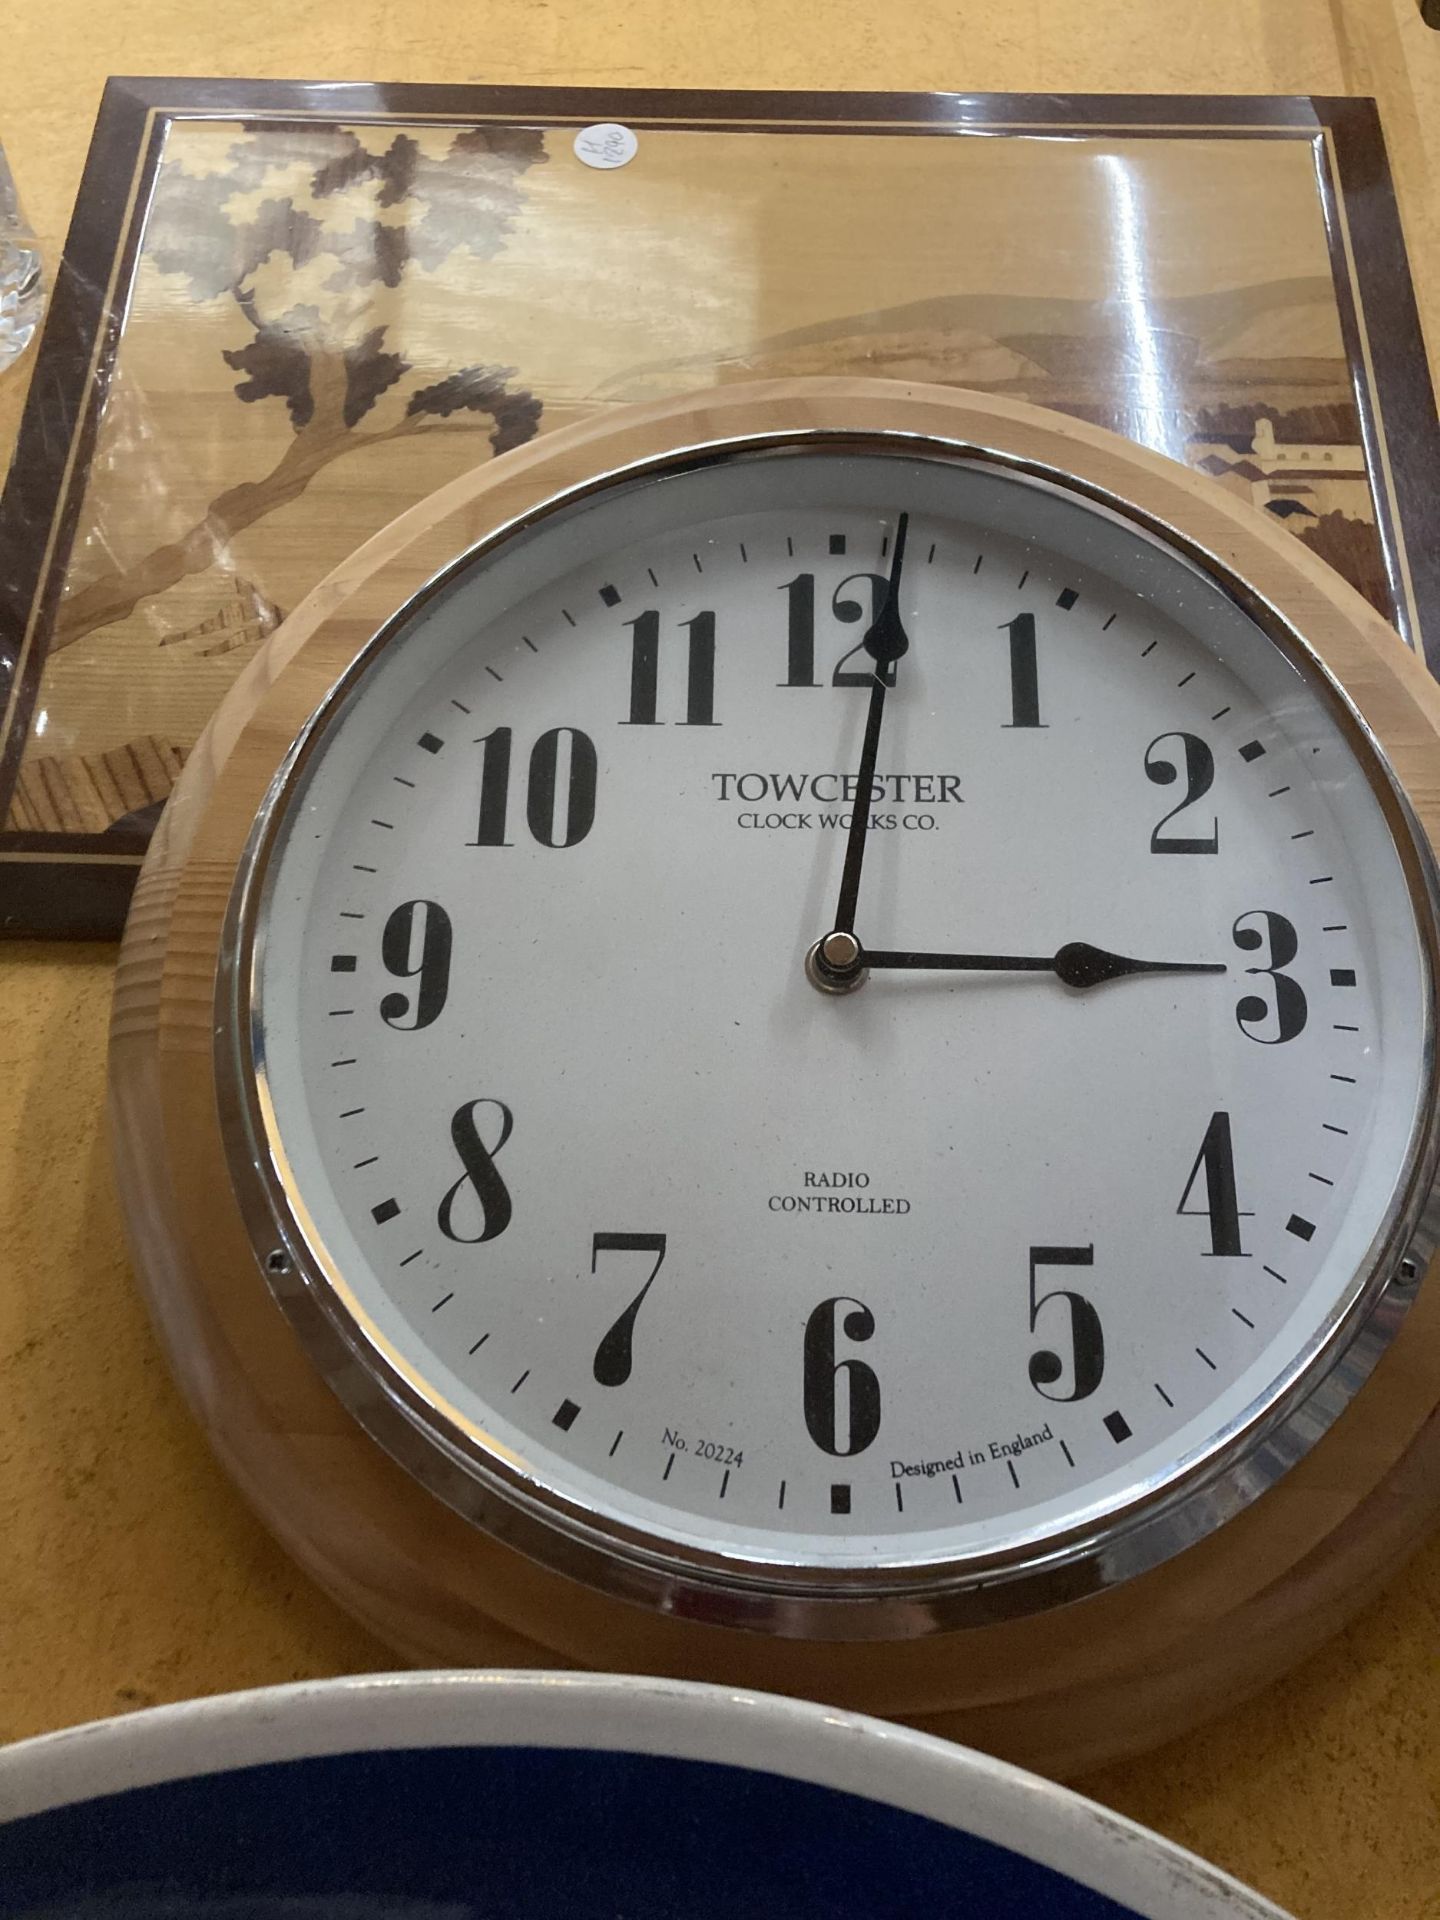 A LARGE ITALIAN MINARDI FAENZA WALL CHARGER, GLASS VASES, TOWCESTER WALL CLOCK, ETC - Image 5 of 6